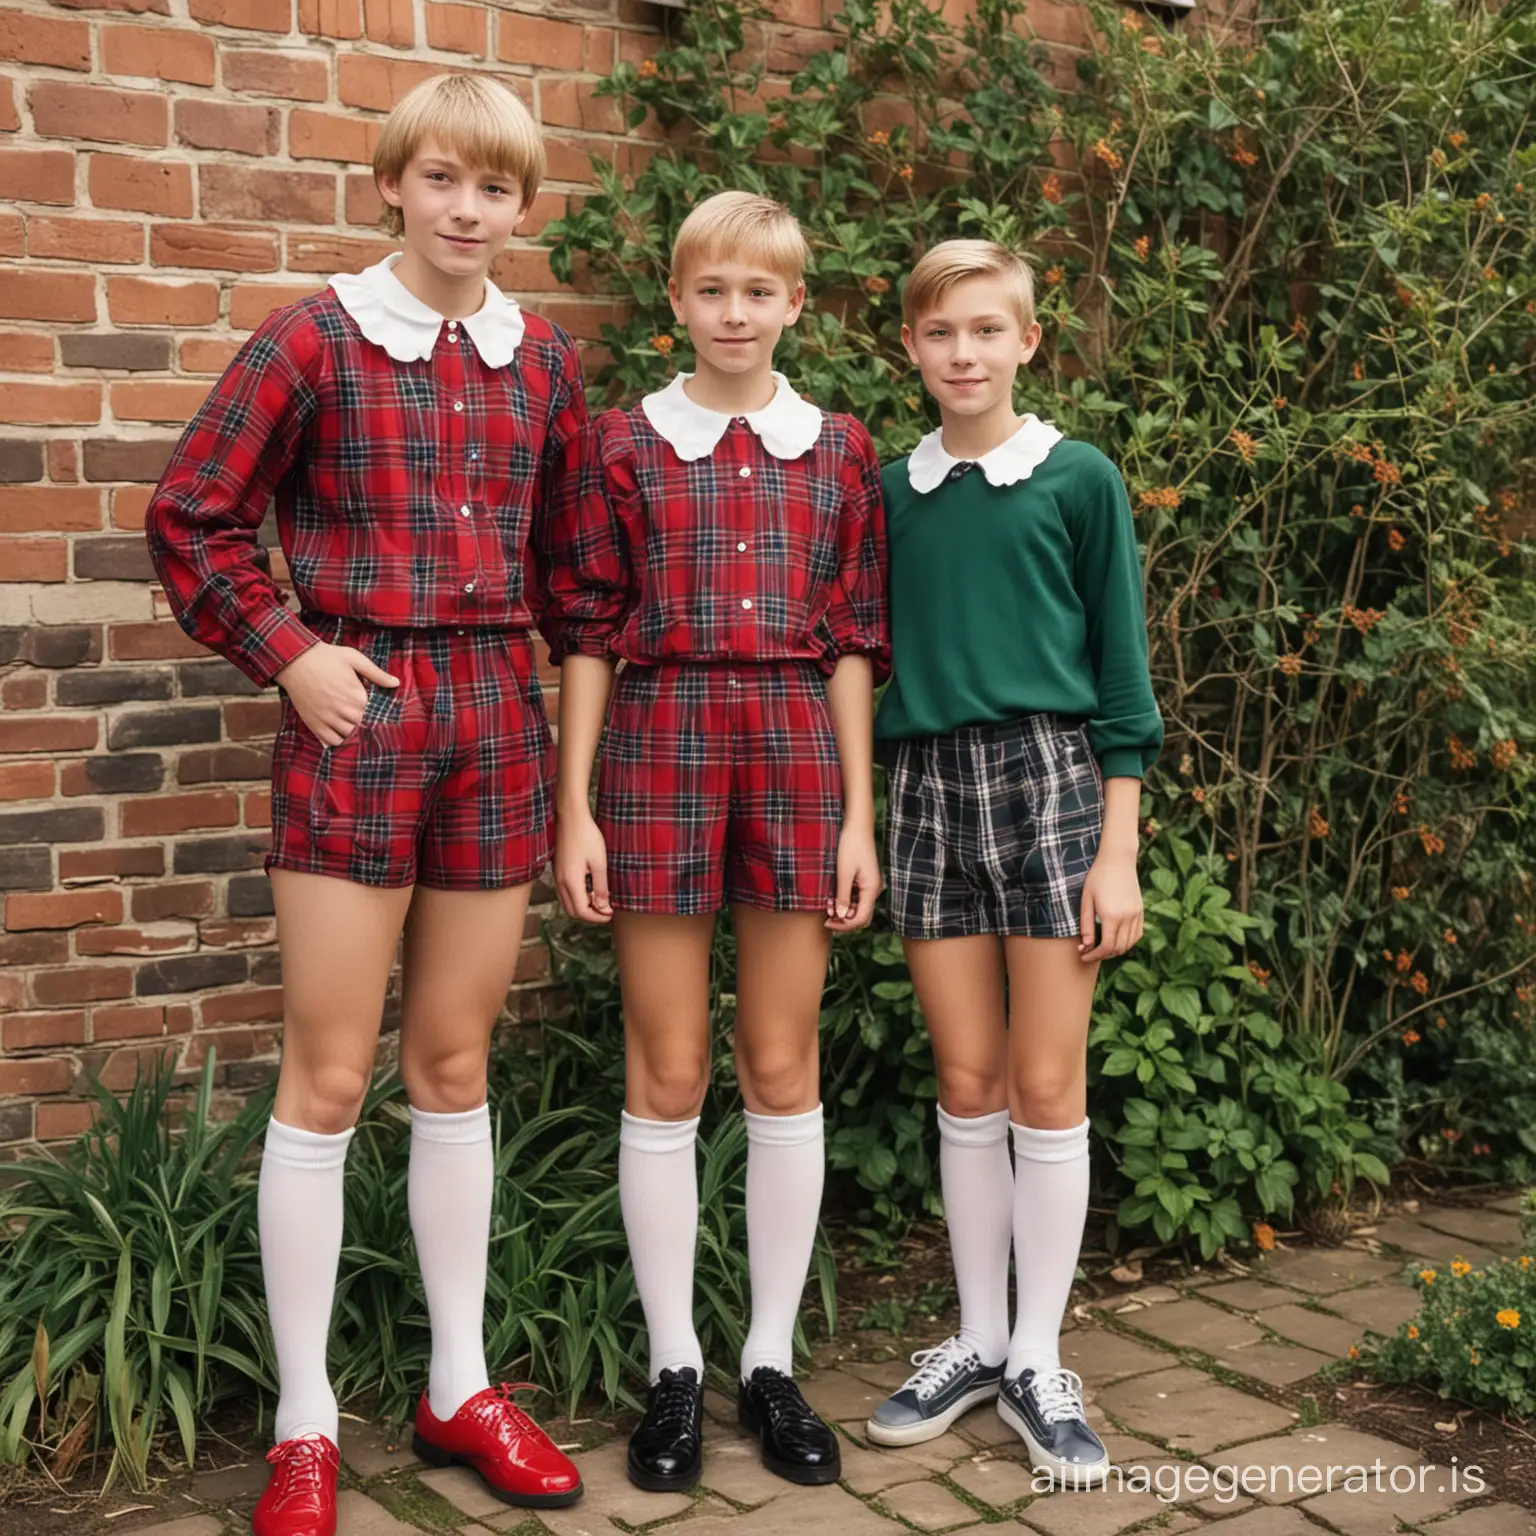 Two 16-year-old blond slender boys, standing against a brick wall in a garden, with a peter pan collar puffy blouse, a red plaid playsuit, white knee-high socks and sneackers., photo